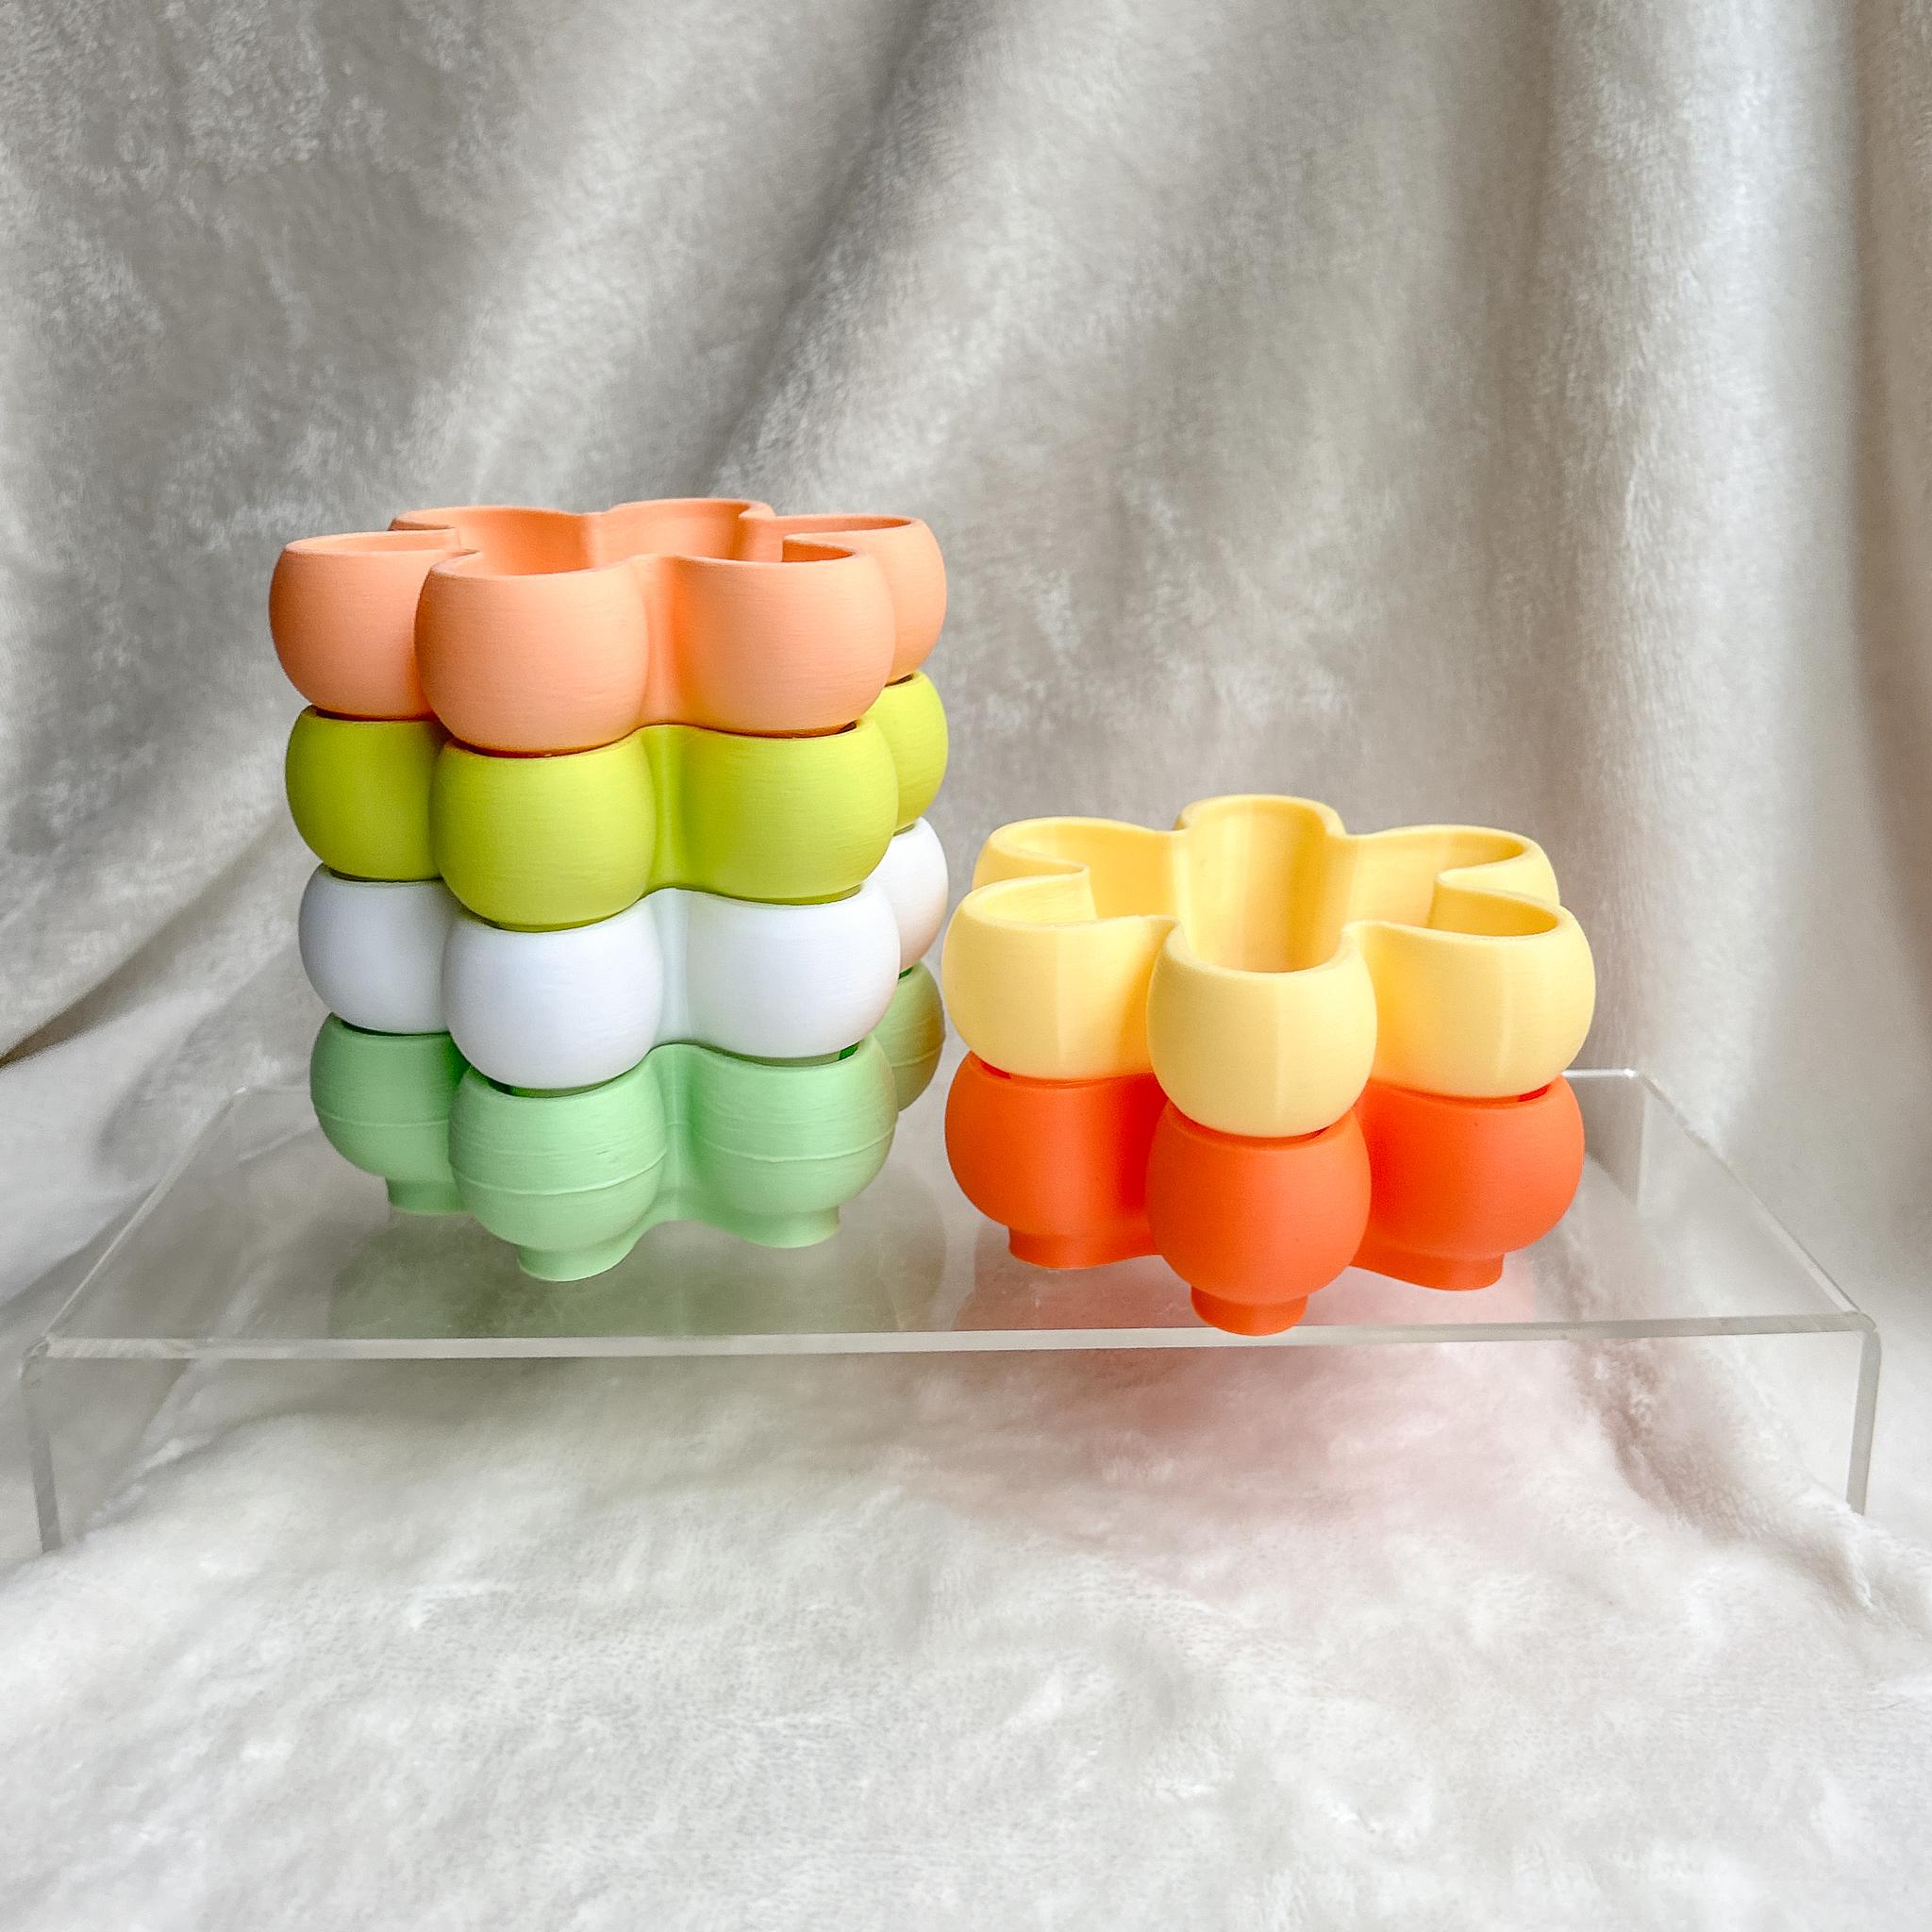 Groovy 70s Stackable Flower Tray: Color-Coding, Space-Saving Organizer for Little Knick-Knacks 3d model